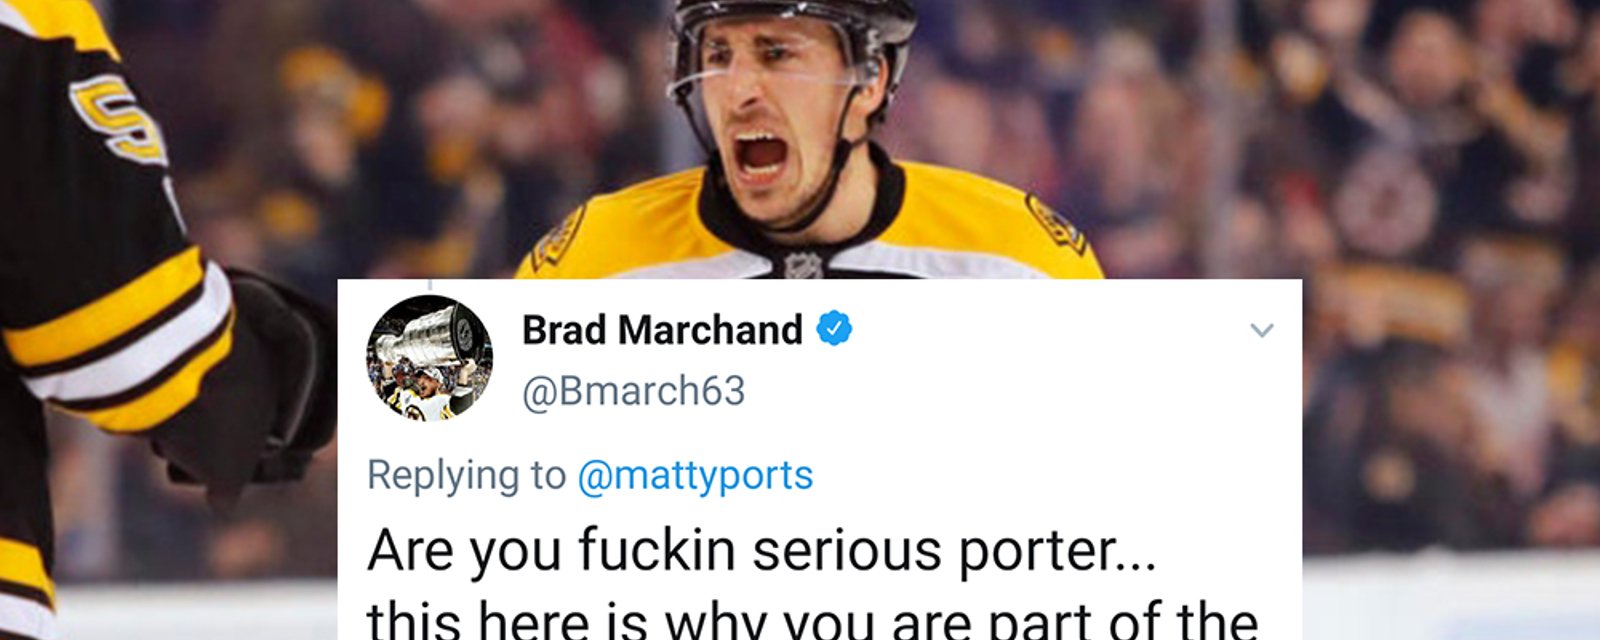 Marchand rips into media calls them out as “part of the problem” in defending teammate Tuukka Rask